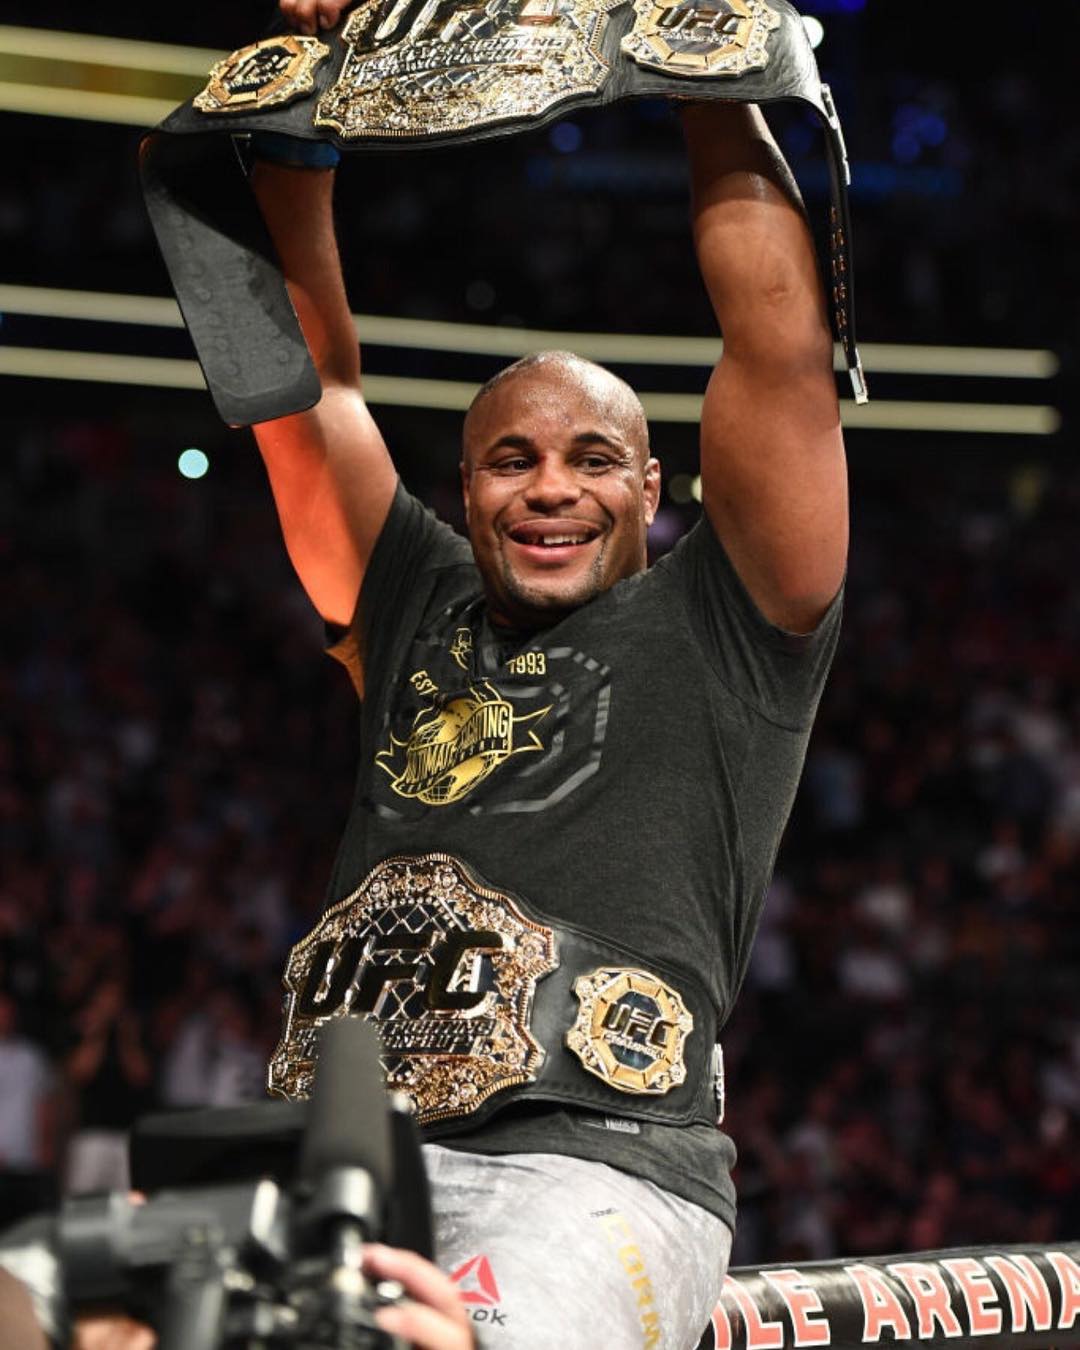 UFC : Cormier responds to Miocic's call out for a rematch, says its an honour to share the Octagon with him -